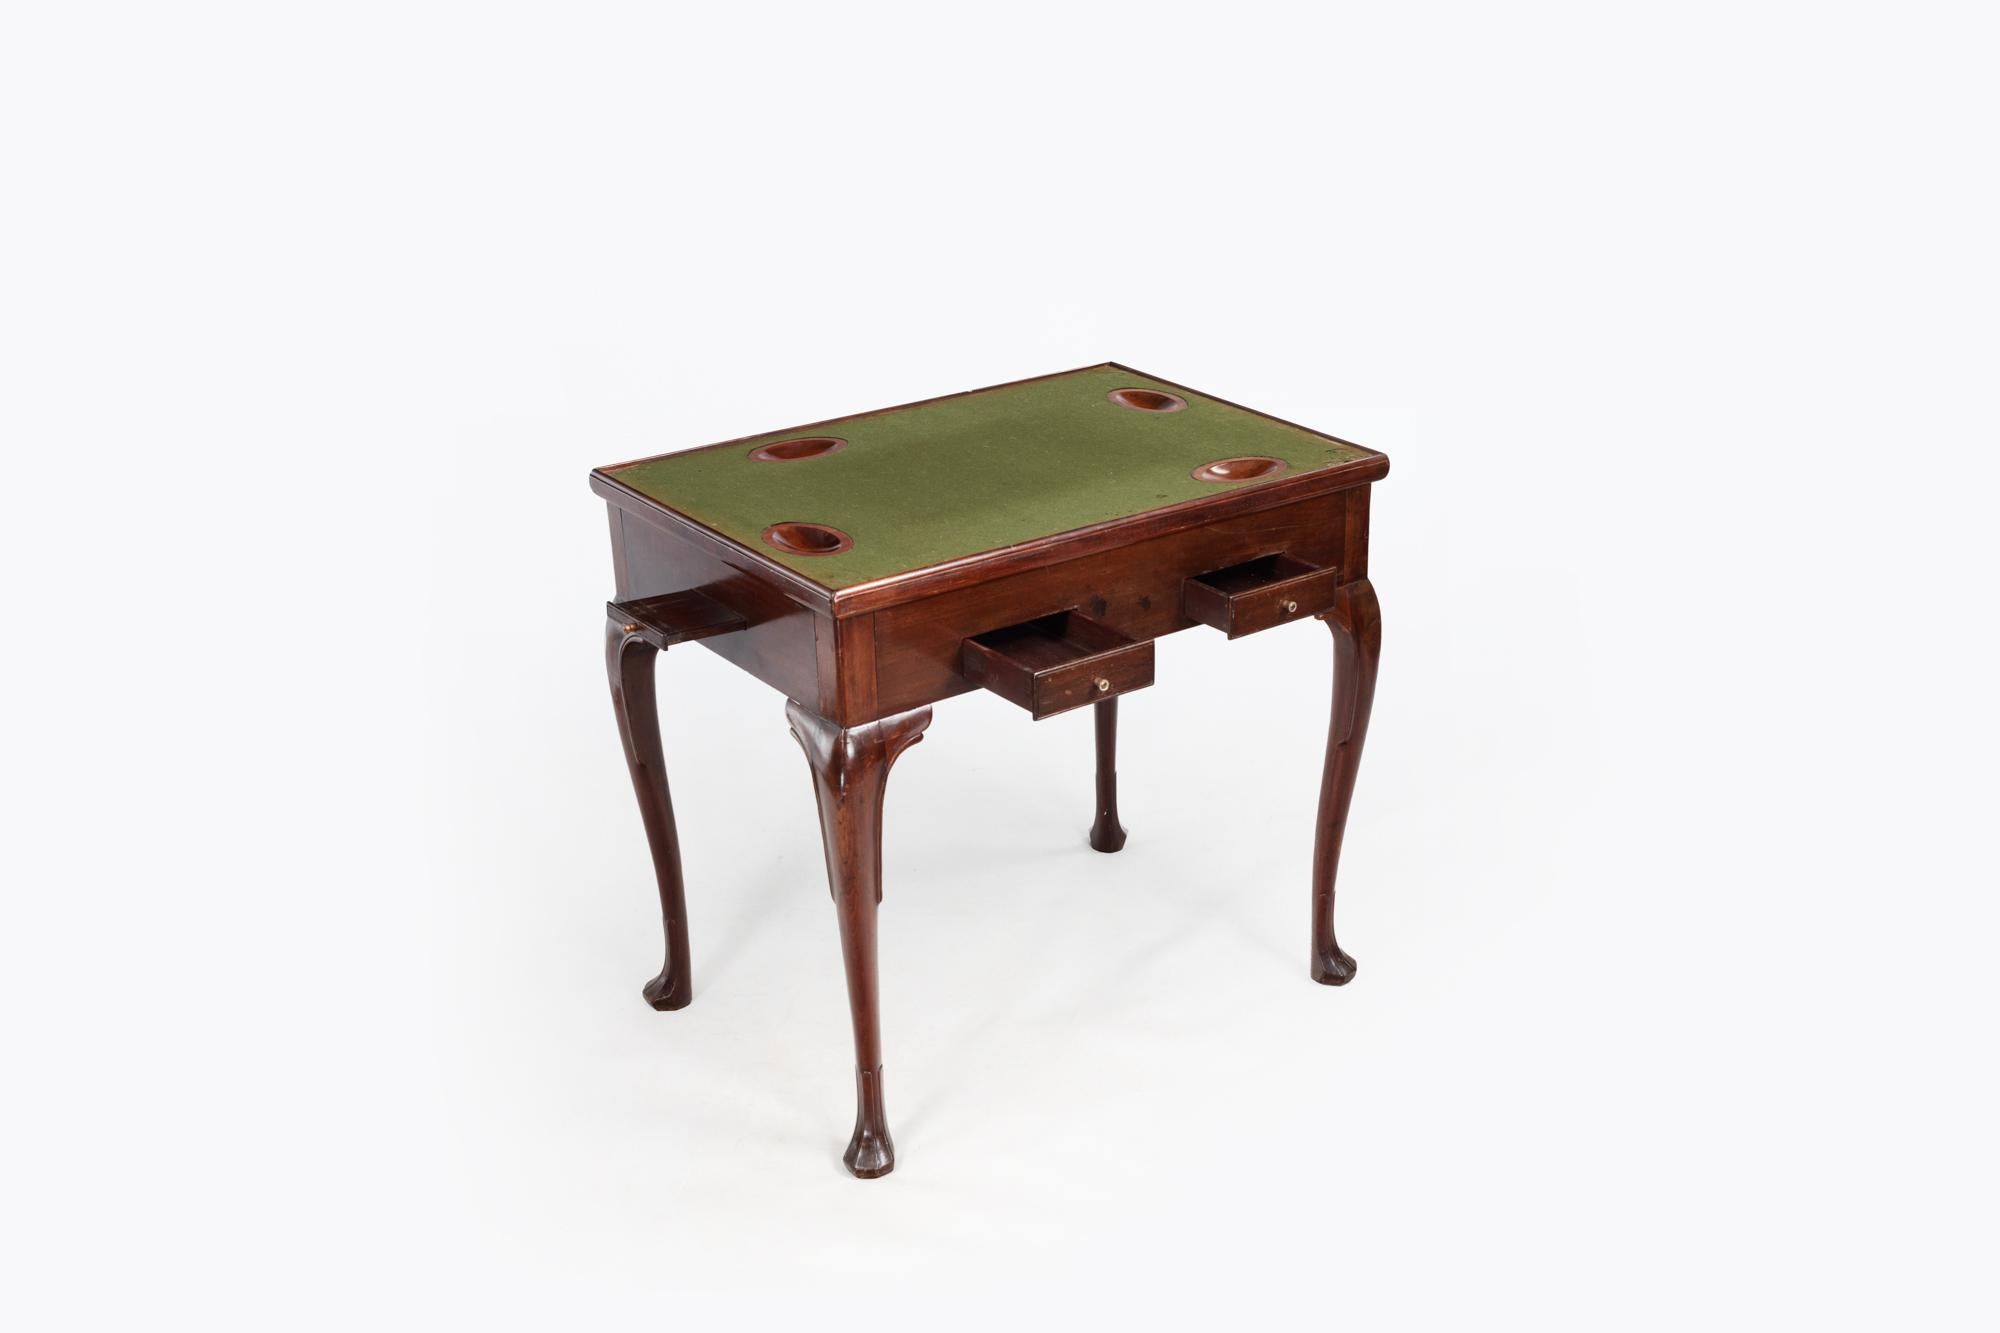 18th Century Irish Georgian mahogany games table featuring lift-off rectangular top. The reversible rectangular dished top with baise playing surface and sunk counter wells sits above the frieze containing fitted pull-out candle and counter slides.